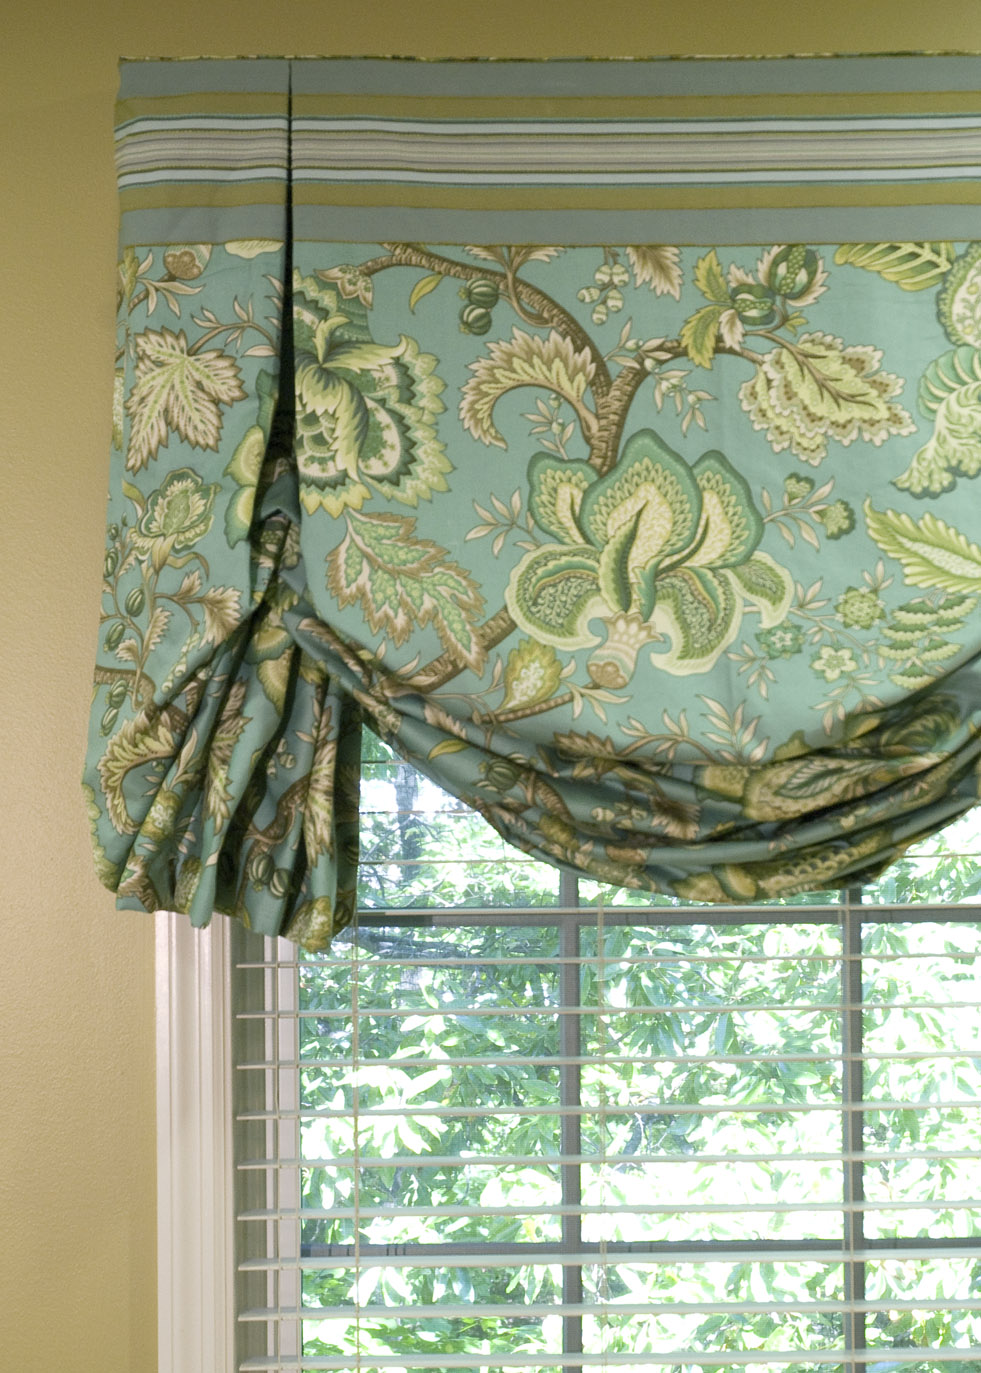 The ABC’s of Decorating….V is for Valances! | Decorating Den Interiors ...